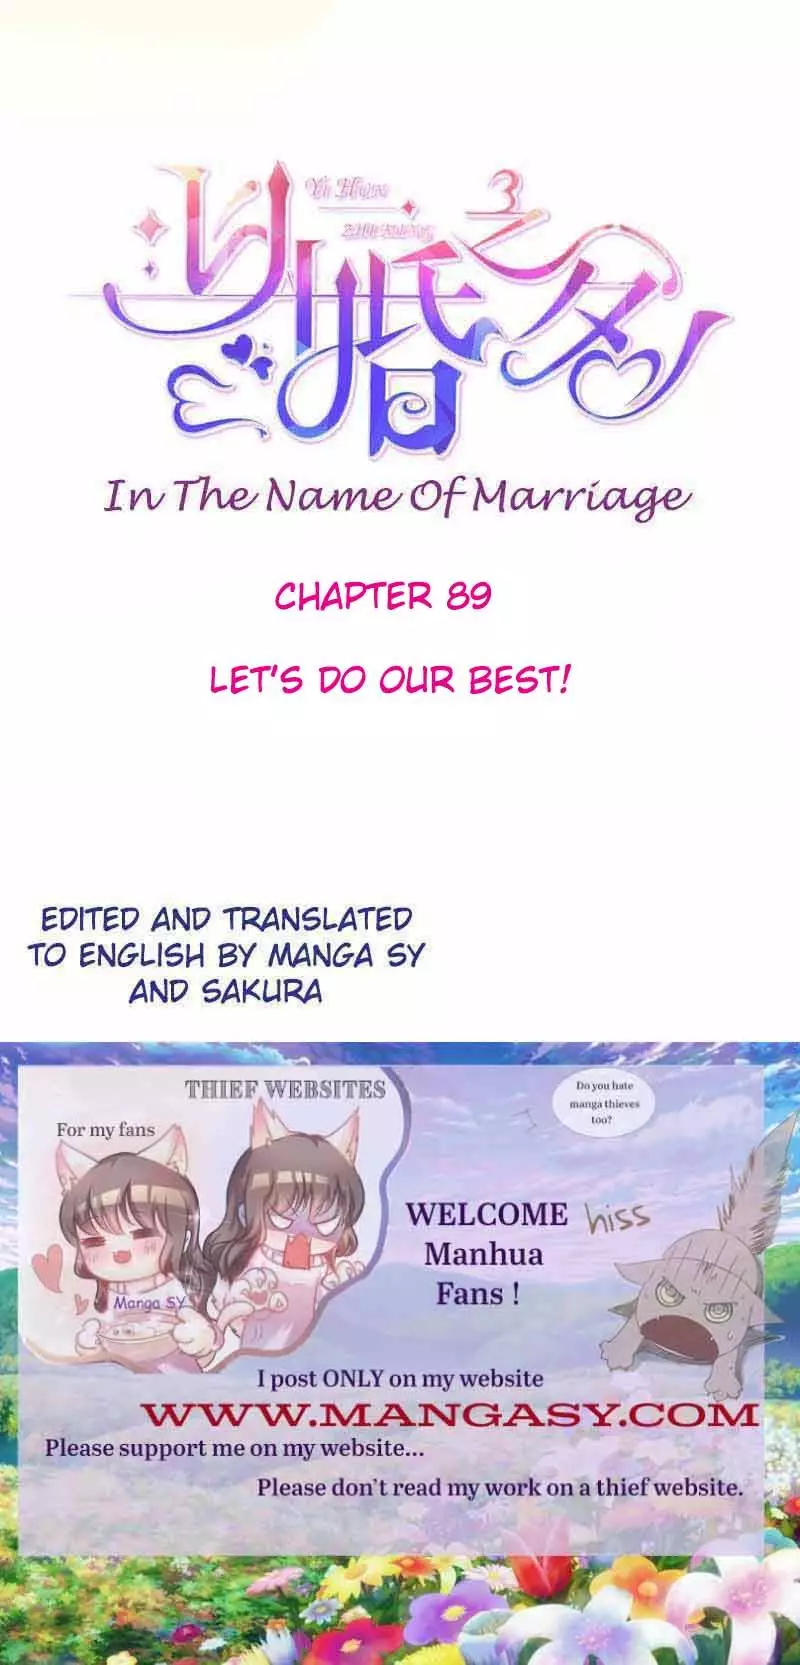 In The Name Of Marriage - 89 page 1-5ee09d36